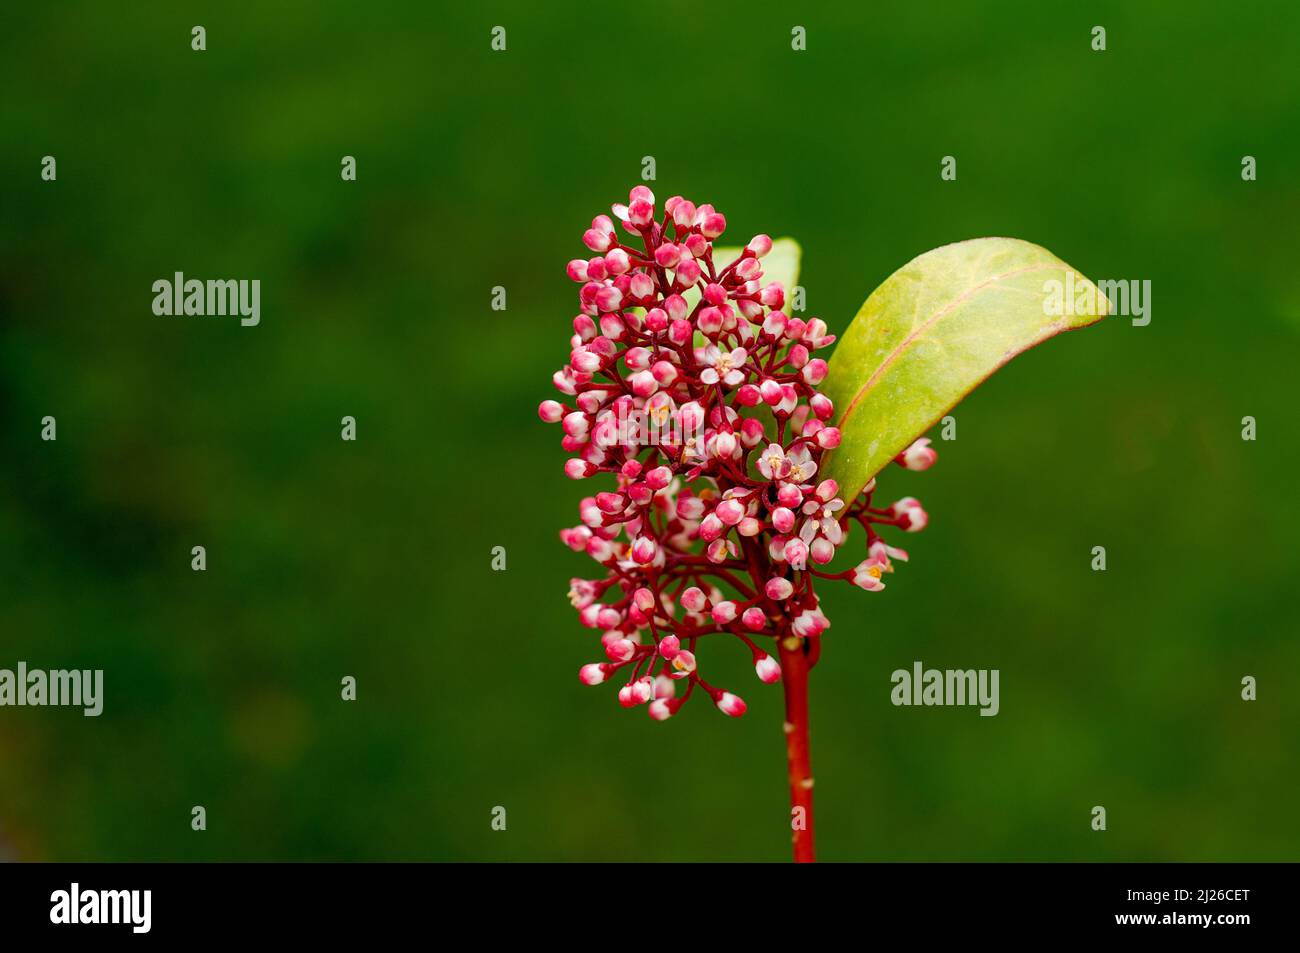 garden flower of pink color on a blurred green background close-up Stock Photo